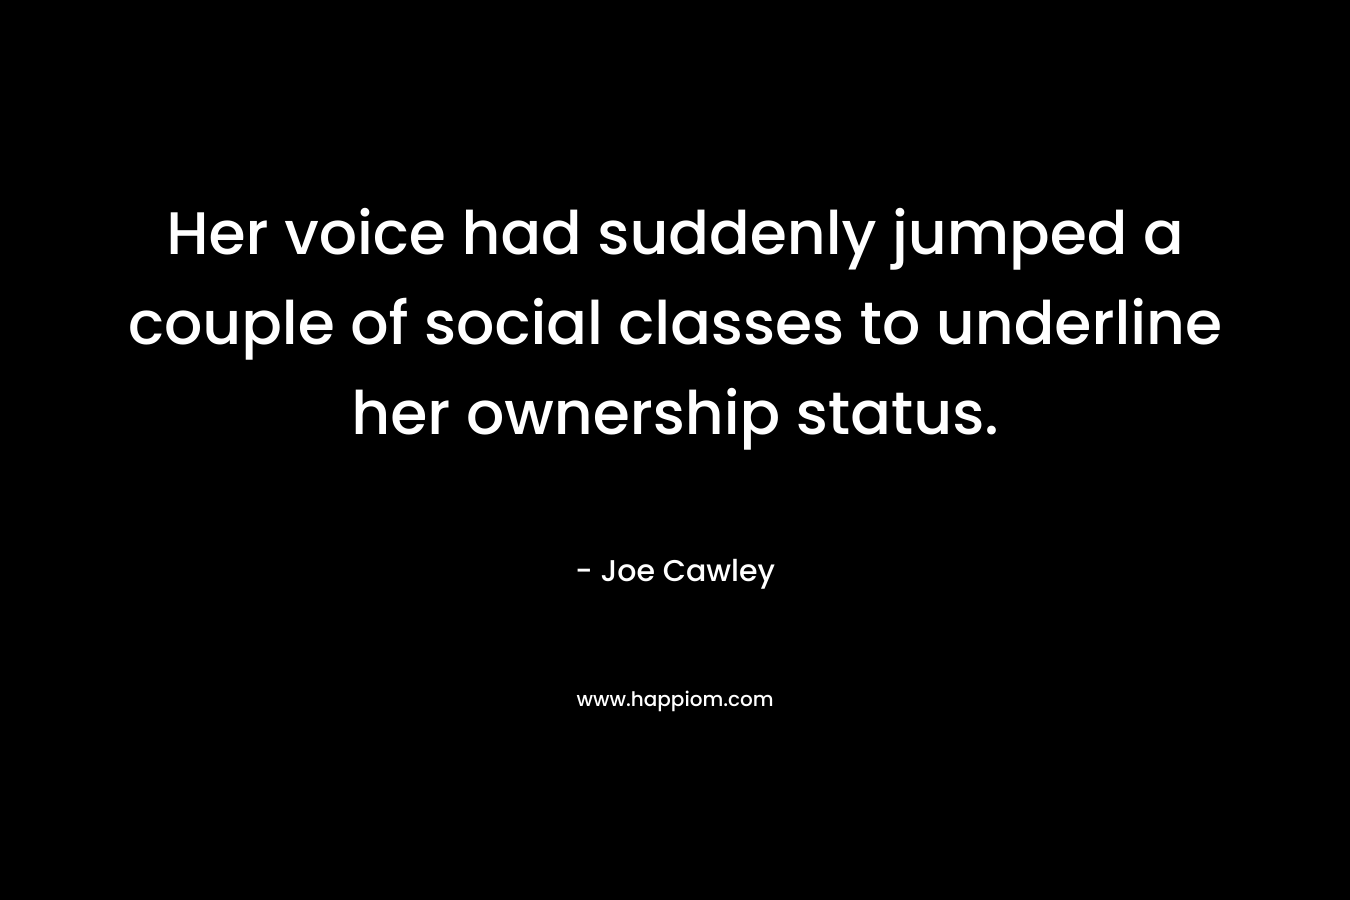 Her voice had suddenly jumped a couple of social classes to underline her ownership status.